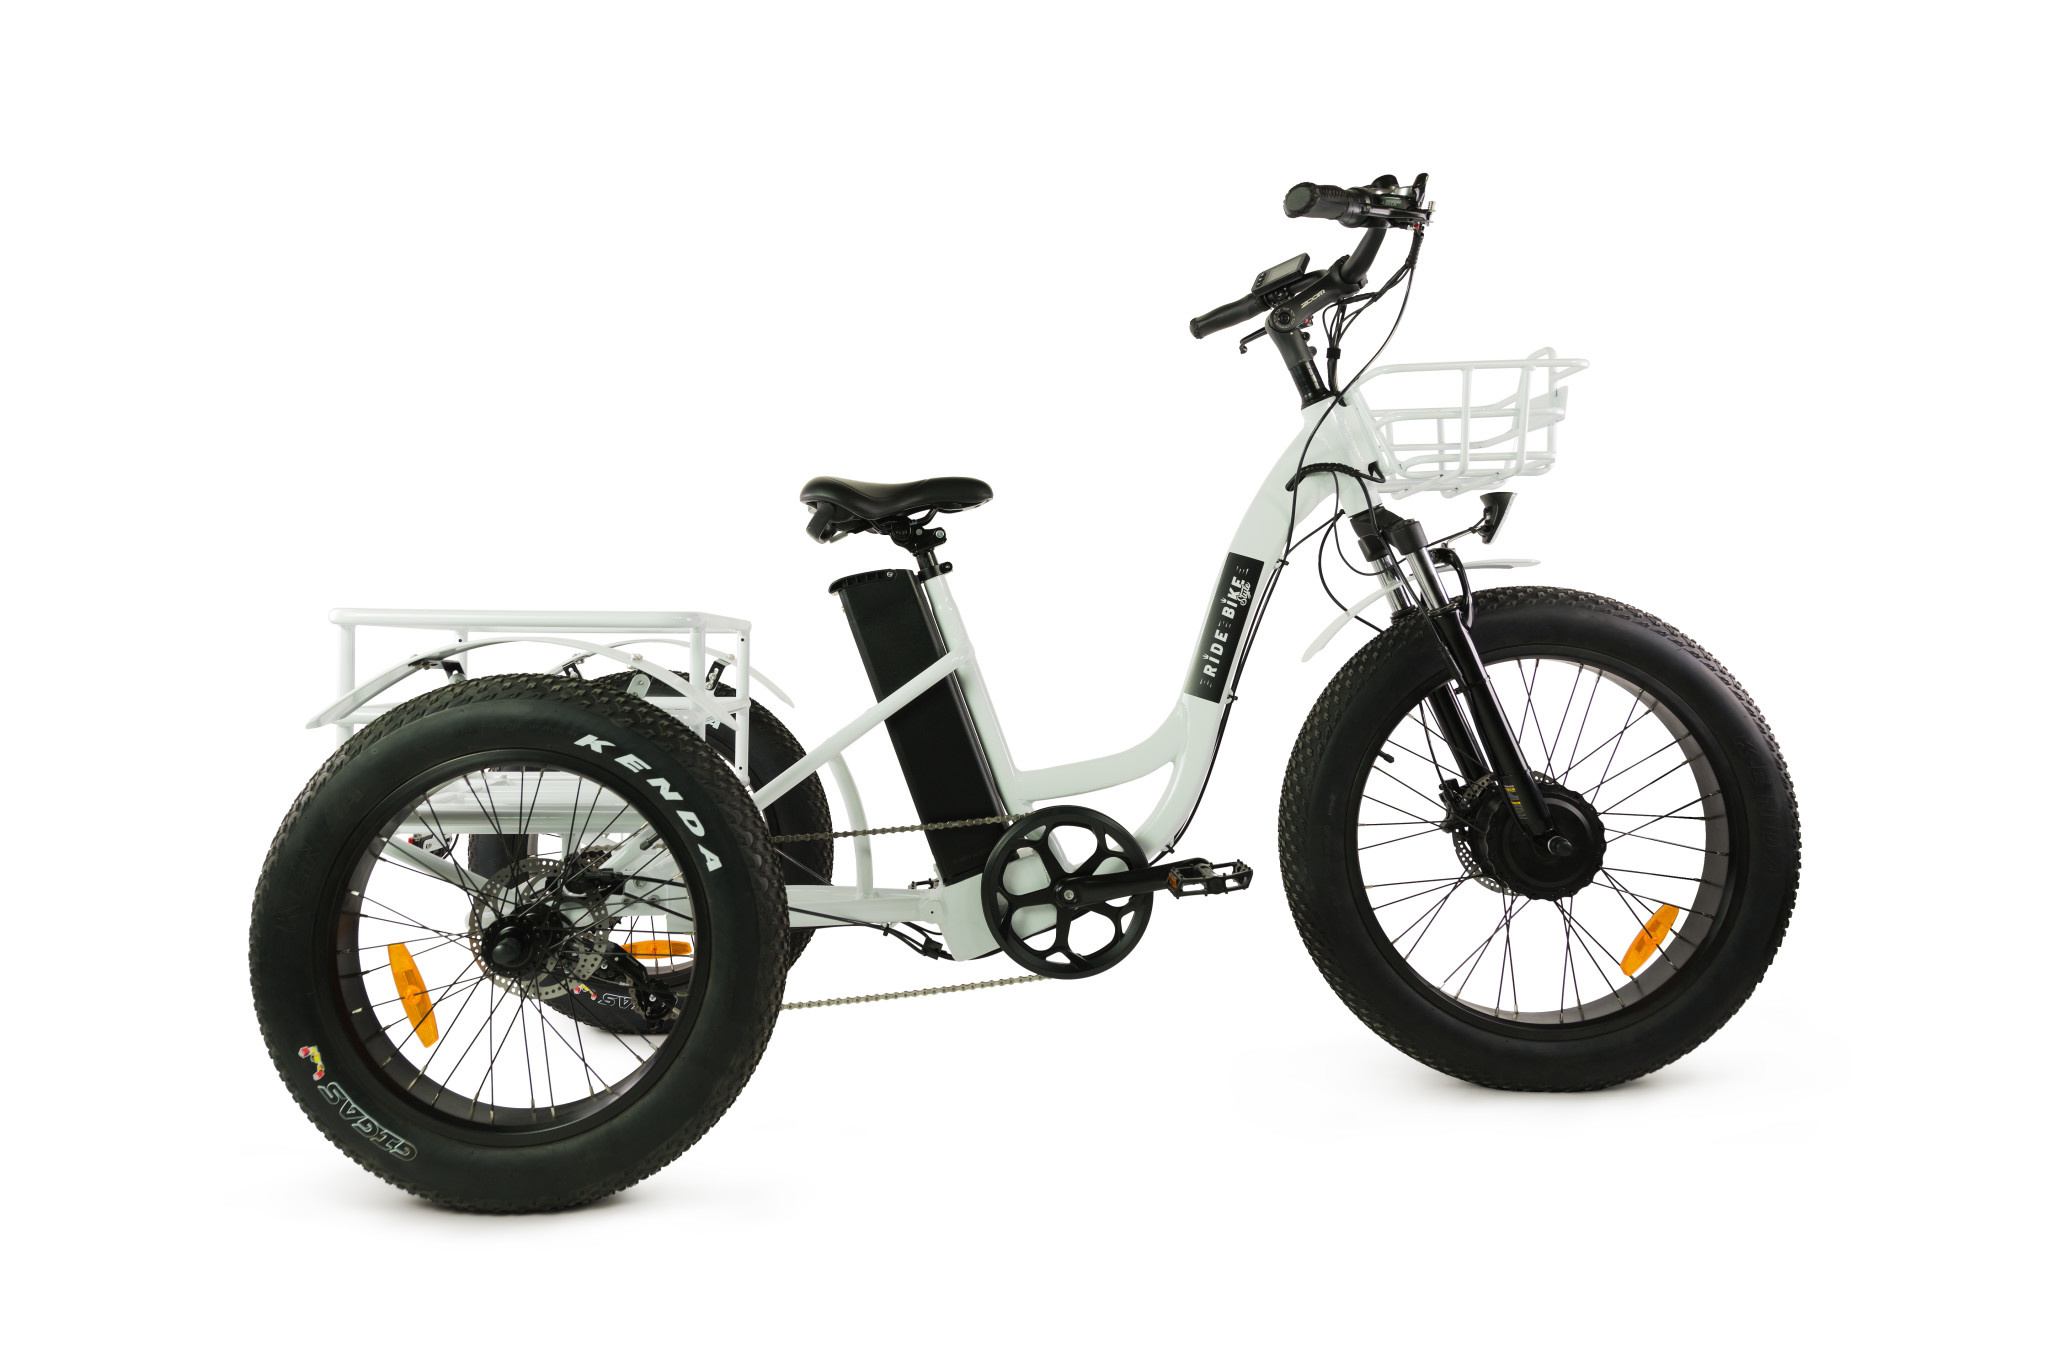 Ride Bike Style - Tricycle 500W - Batterie 48V 15.6AH - Ride Bike Style